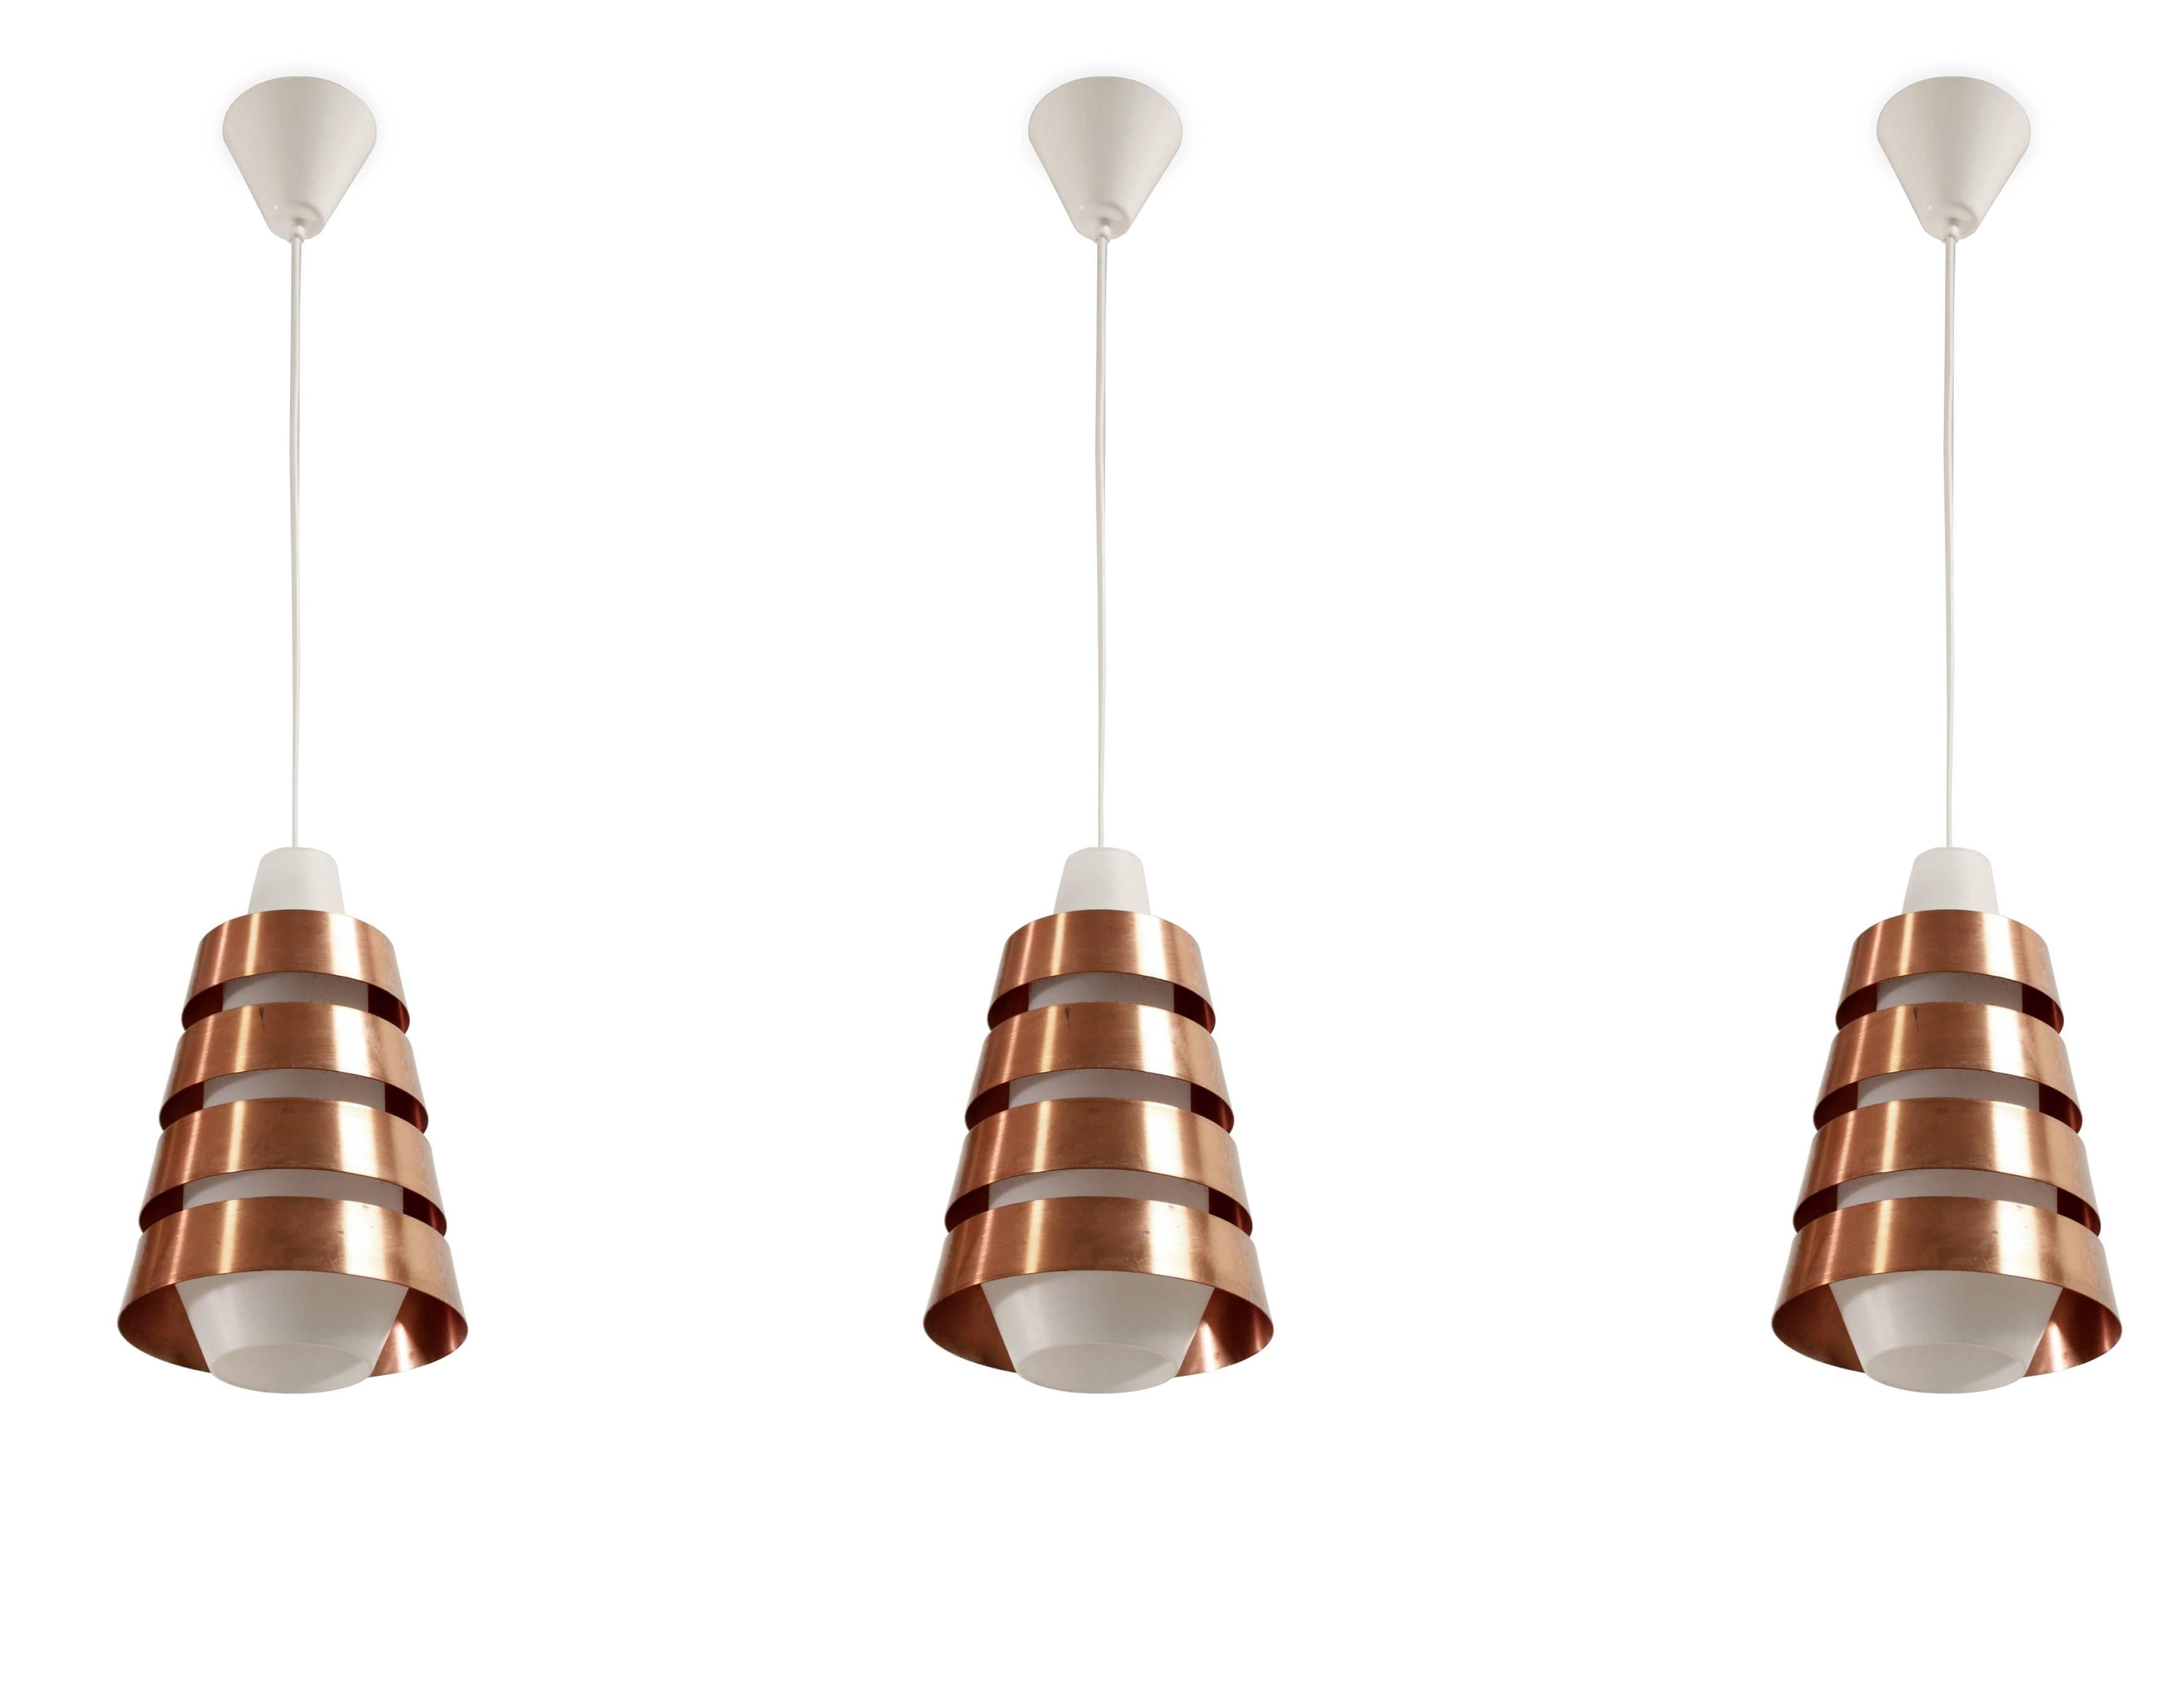 Outstanding and large ceiling lamps in copper and shades in opaline glass. Most likely designed and made in Denmark, circa 1960s second half. The lamps are fully working and in very good condition.